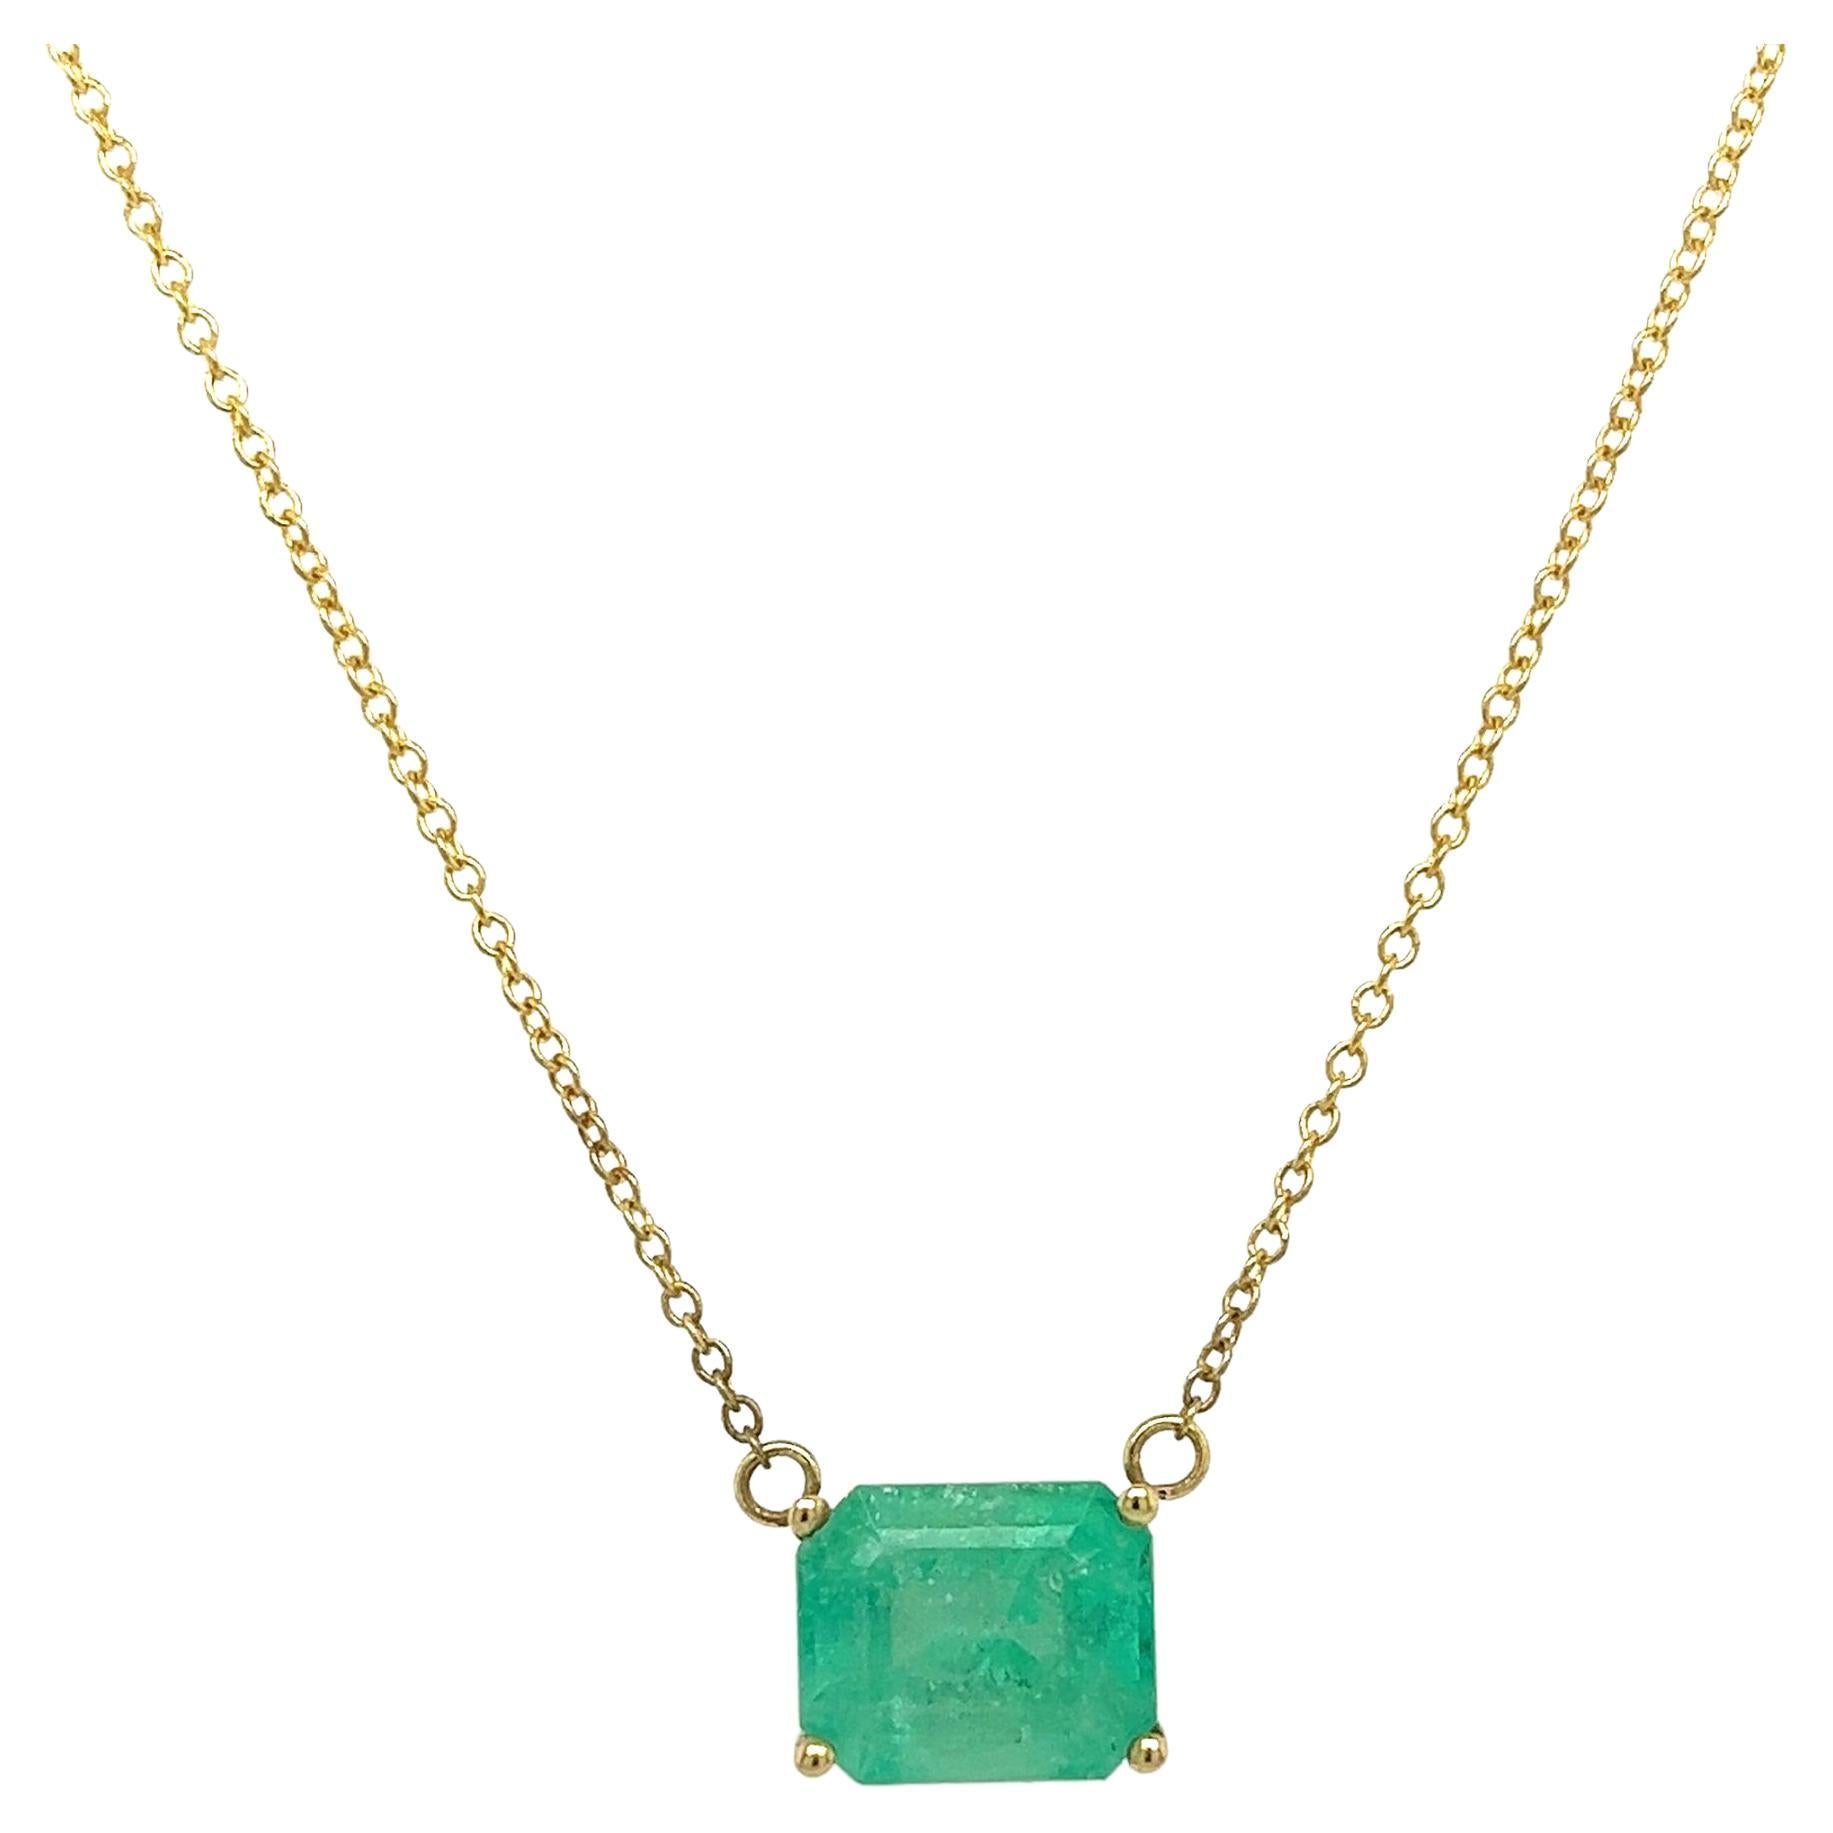 3.6 Carat Colombian Emerald Solitaire East West Pendant Necklace in 14K Gold For Sale